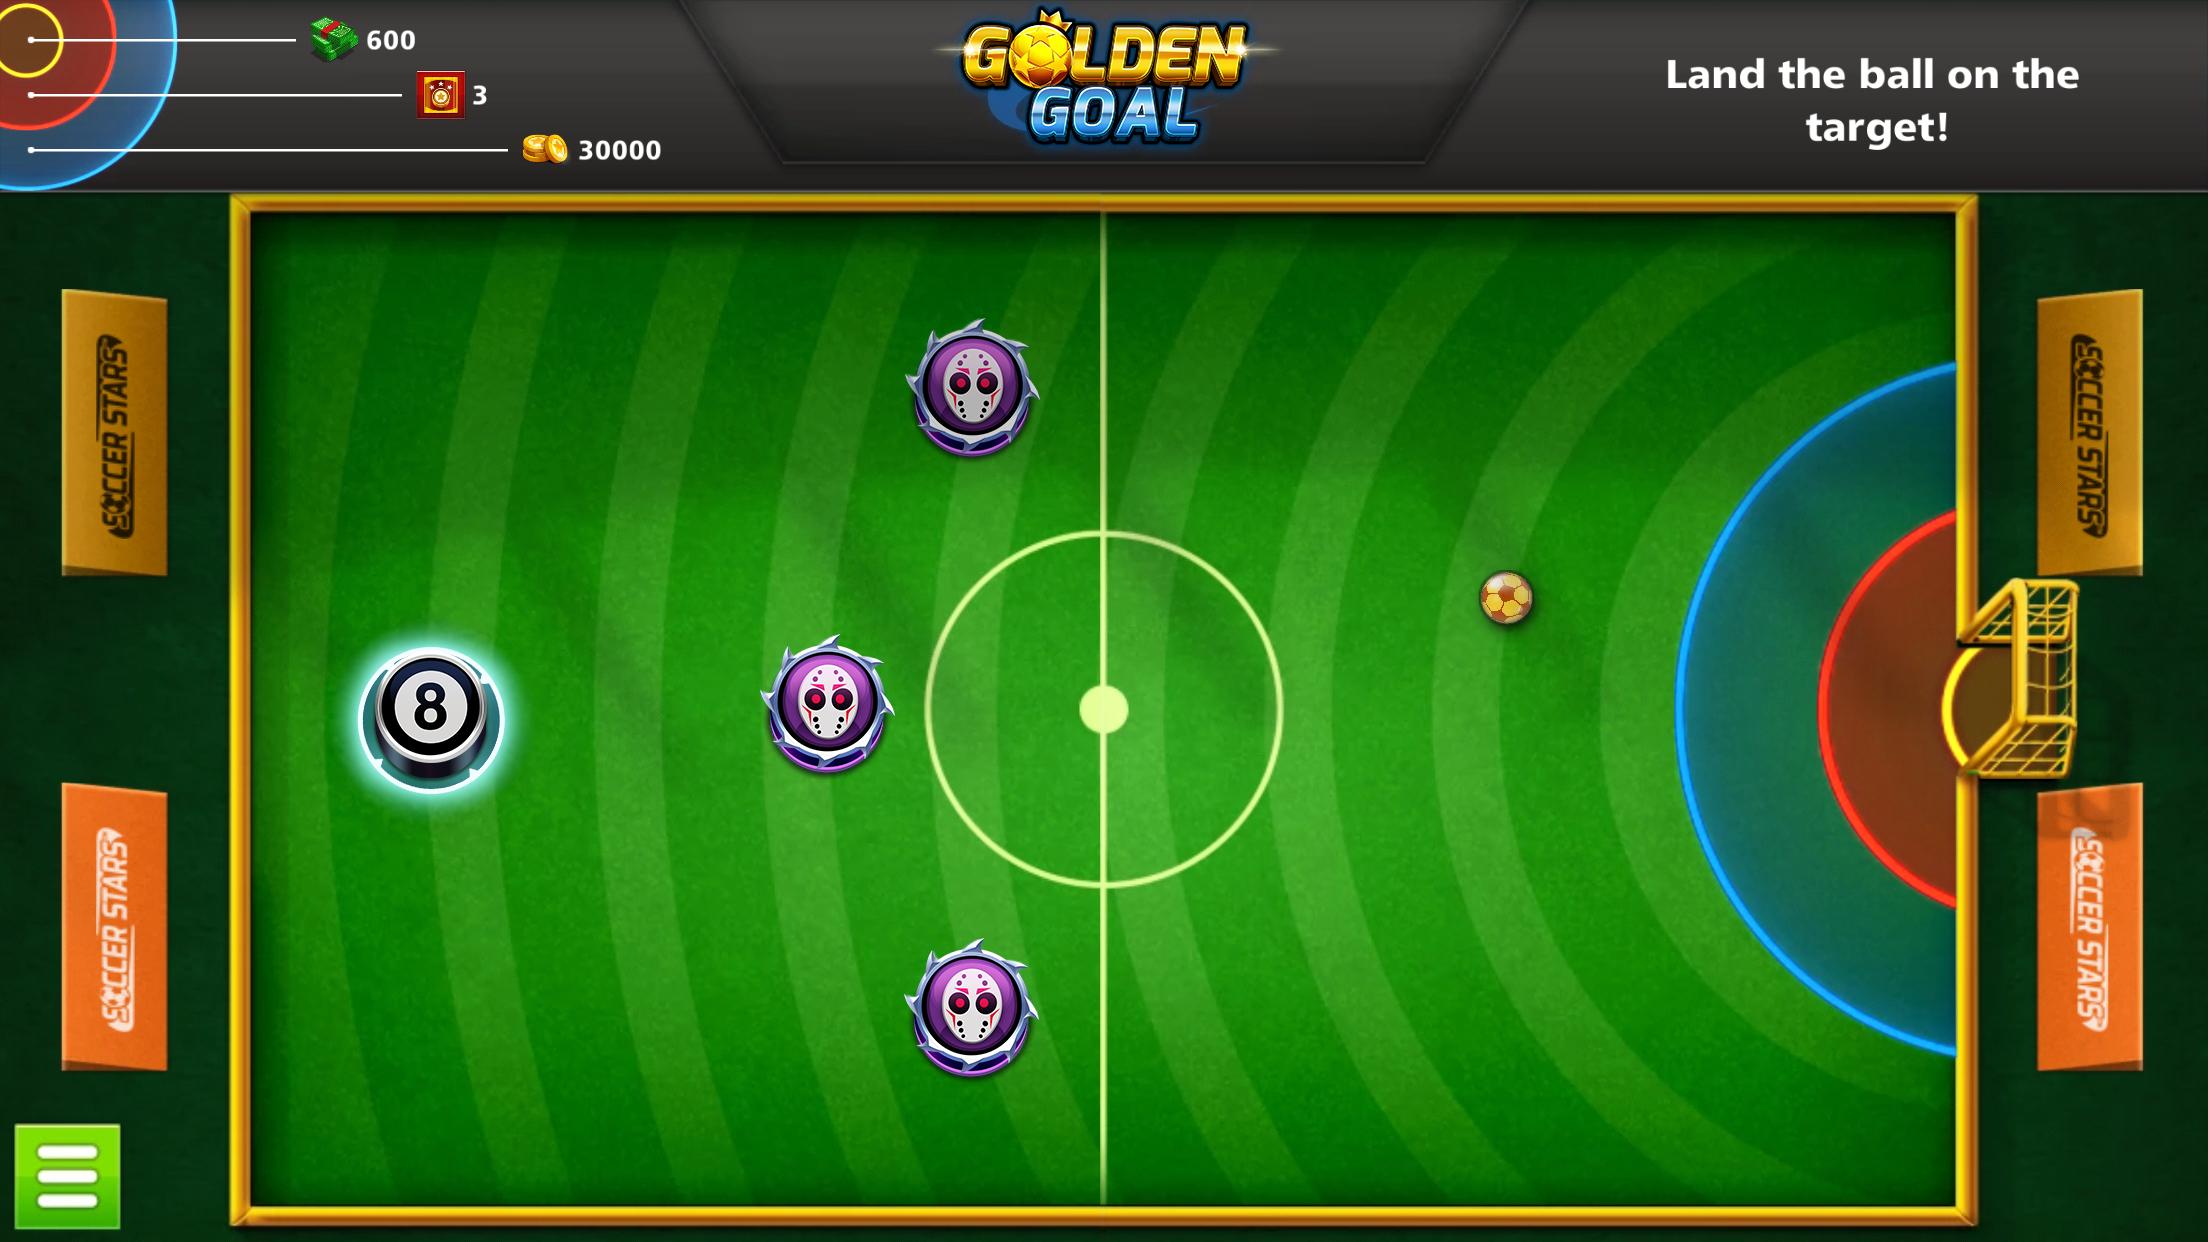 Soccer Stars for Android - APK Download - 